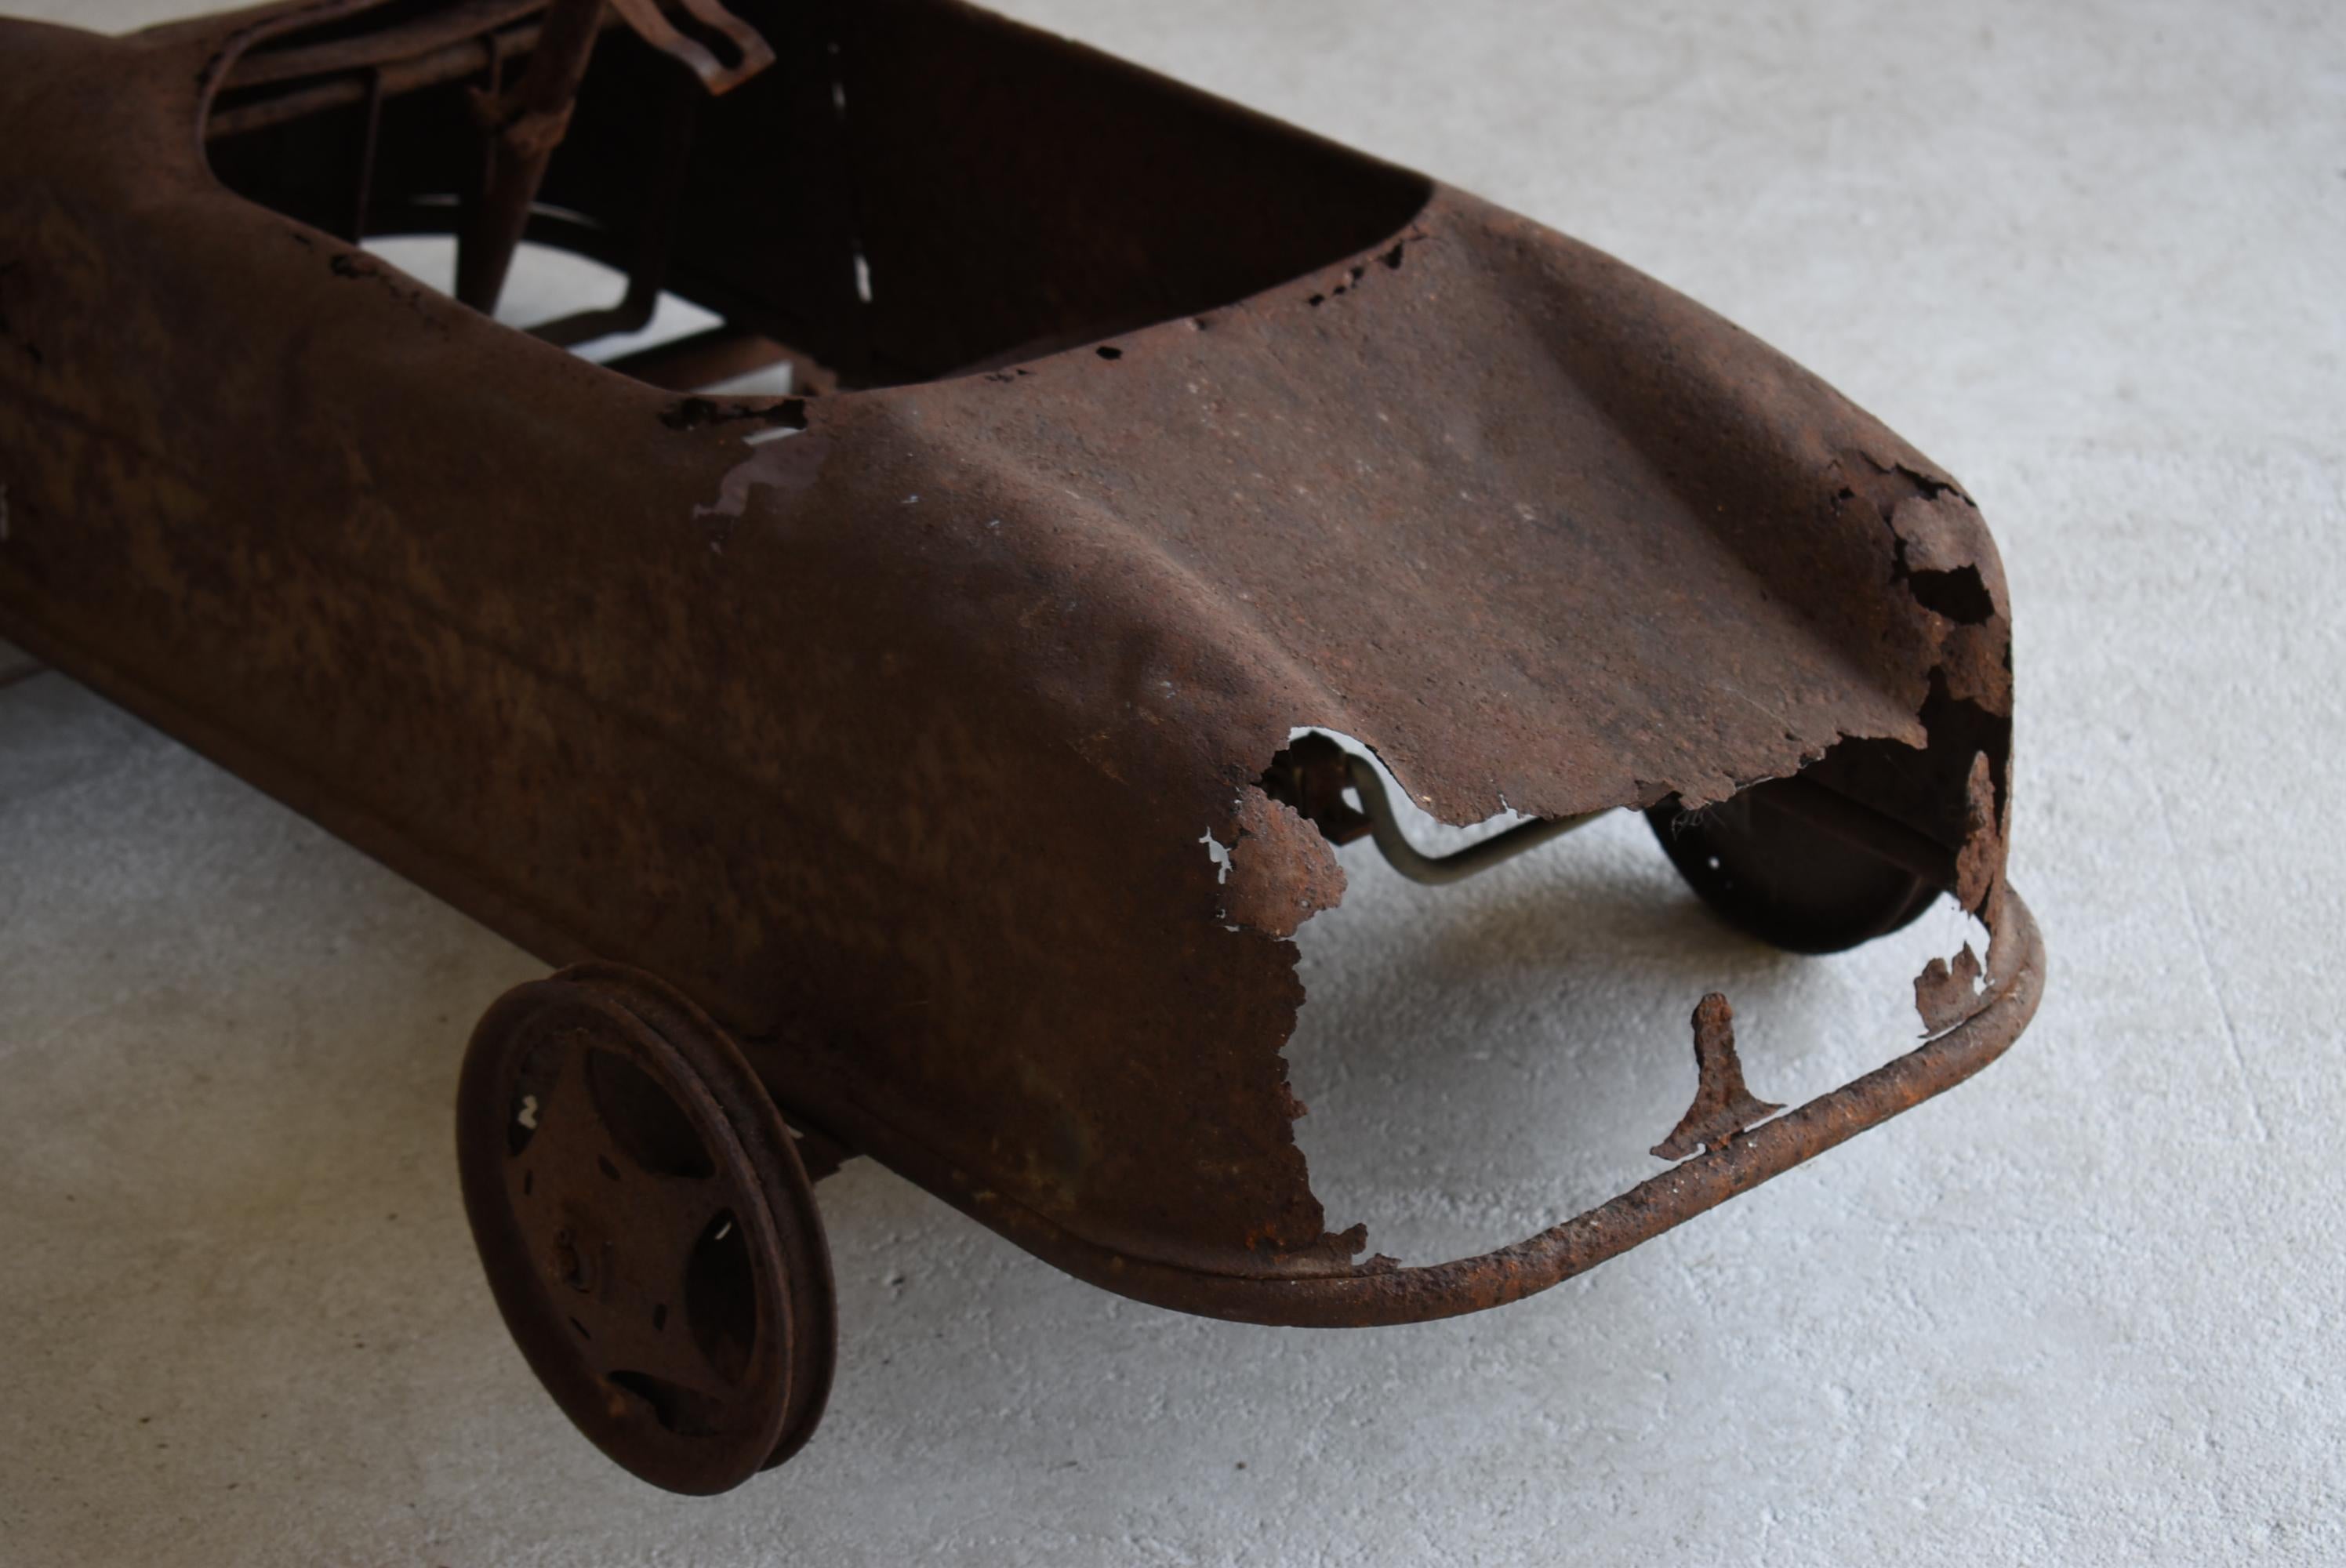 Japanese antique Rusted Car Toys 1940s-1970s/Figurine Object Wabisabi decor 3